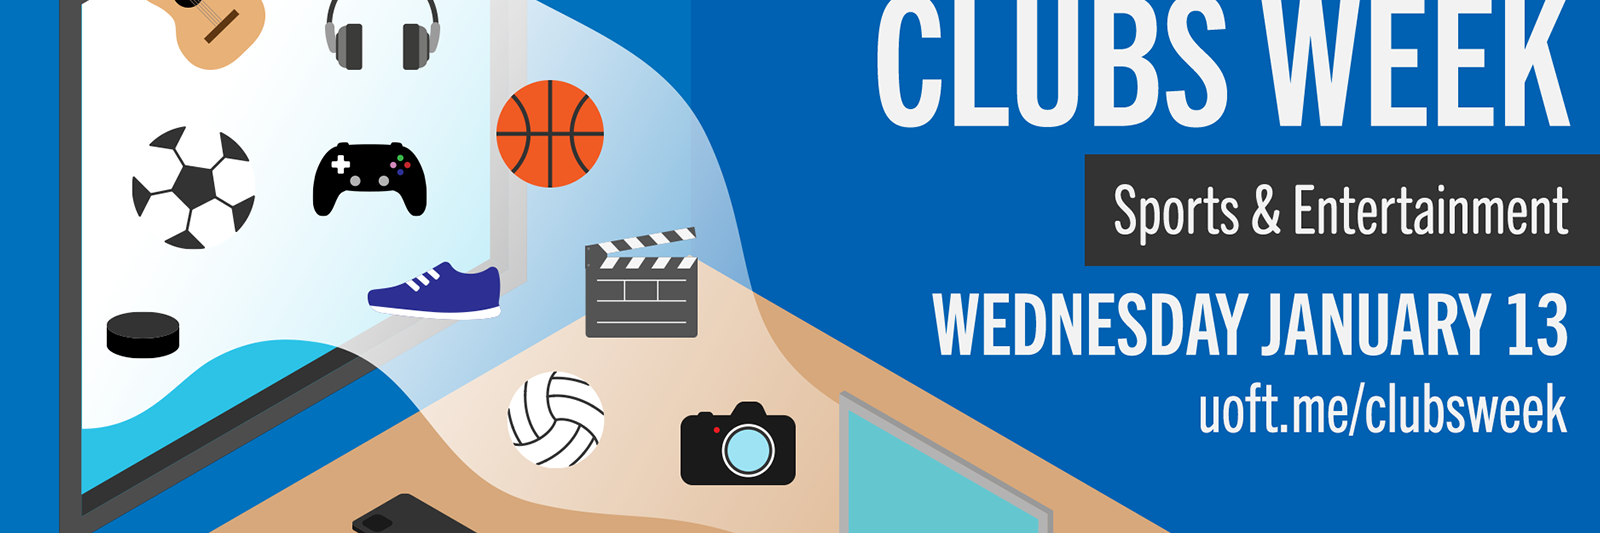 Clubs Week sports and entertainment